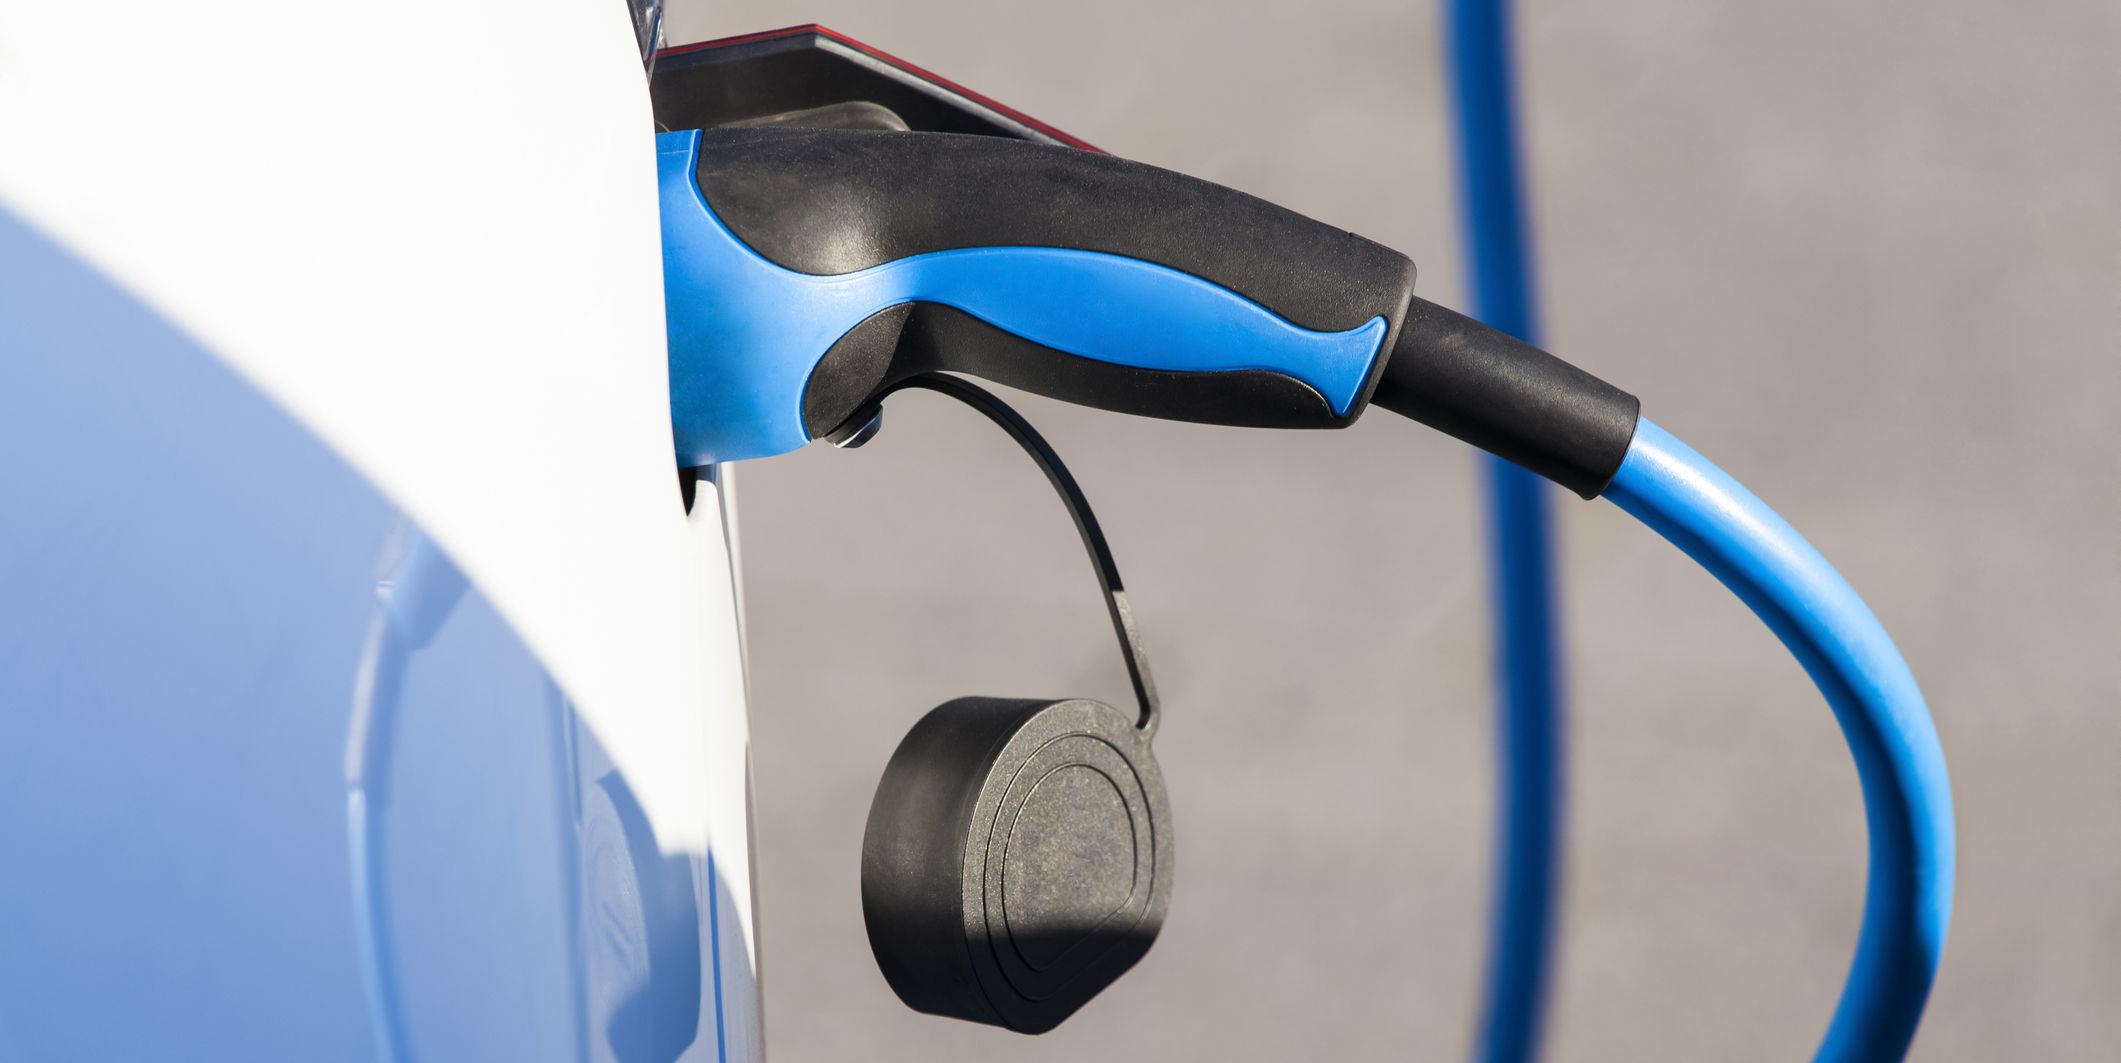 We Tested The Best Home EV Chargers for 2022